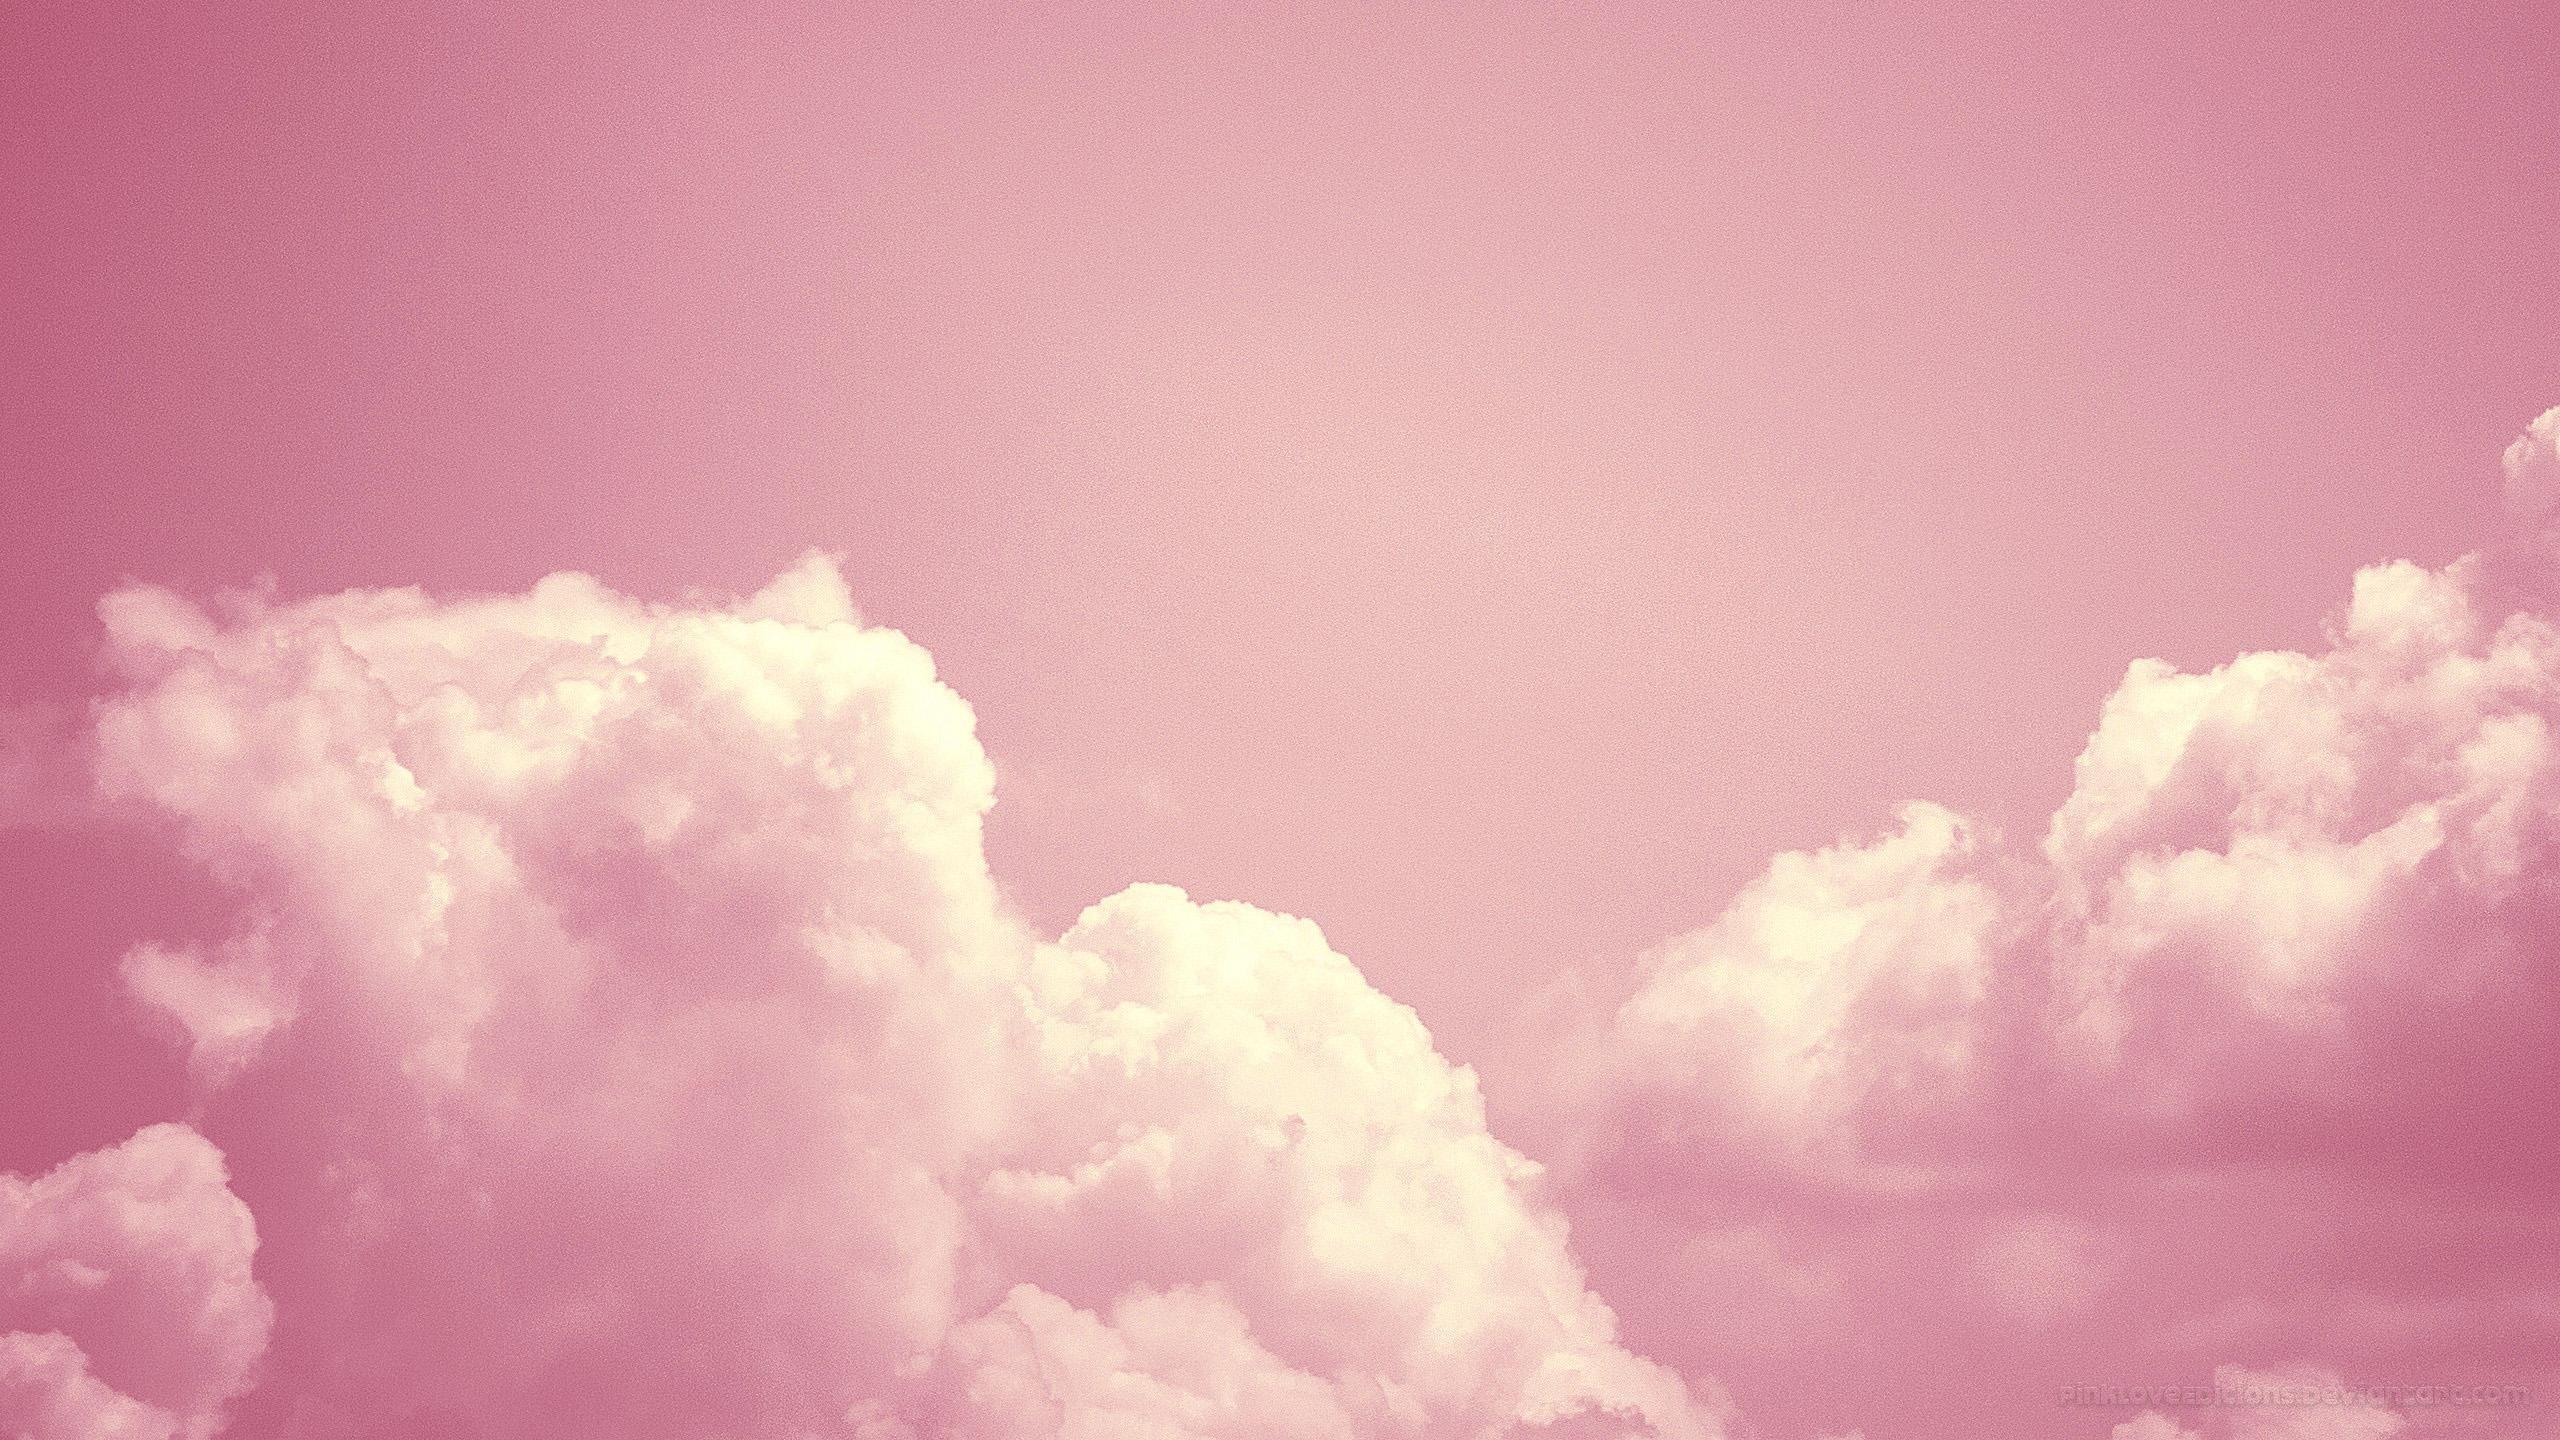  Clouds  Aesthetic  Tumblr Wallpapers  Top Free Clouds  